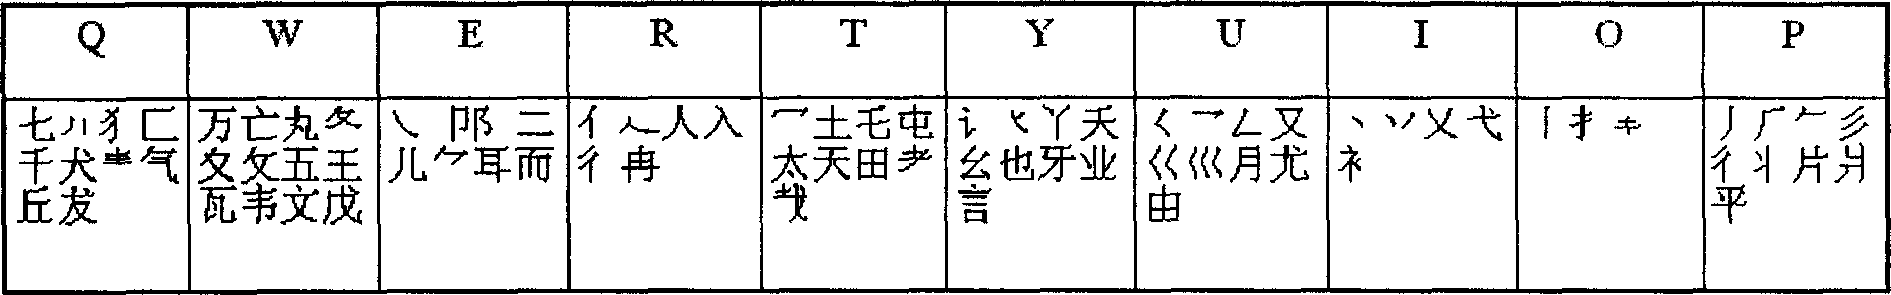 Chinese character input method using initial and etymon to encode for computer